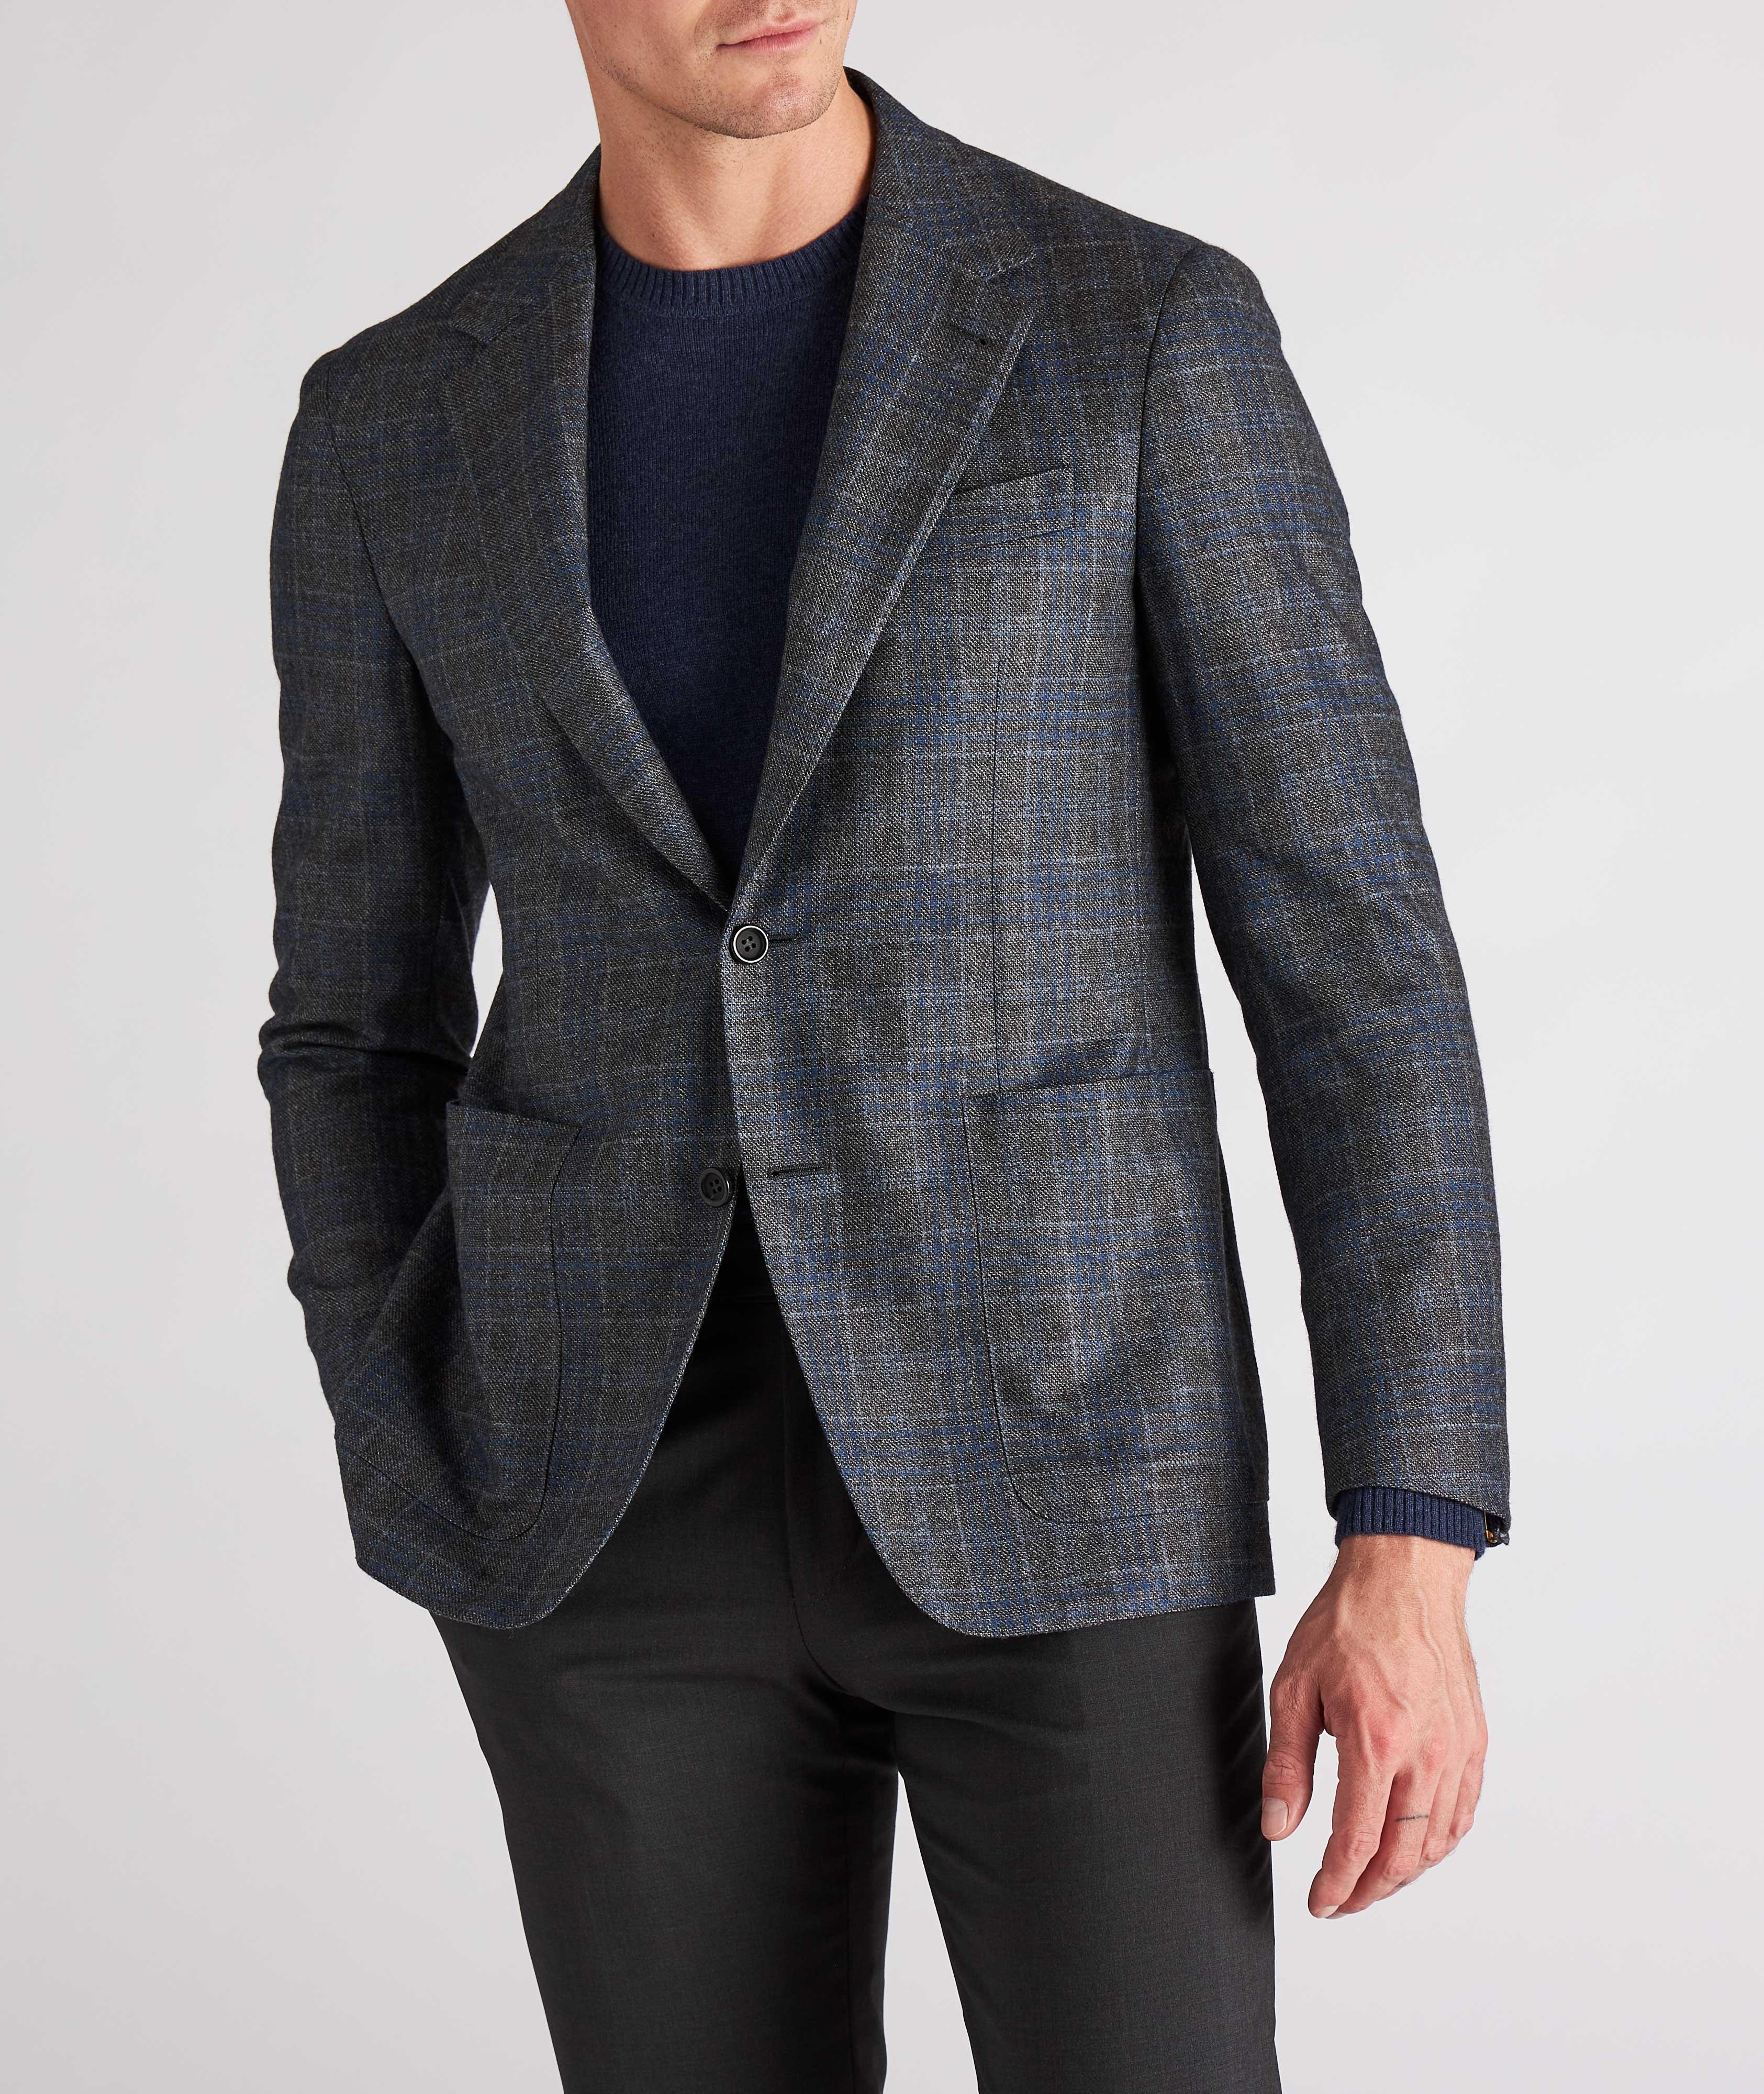 Slim Fit Checked Wool Sports Jacket image 1